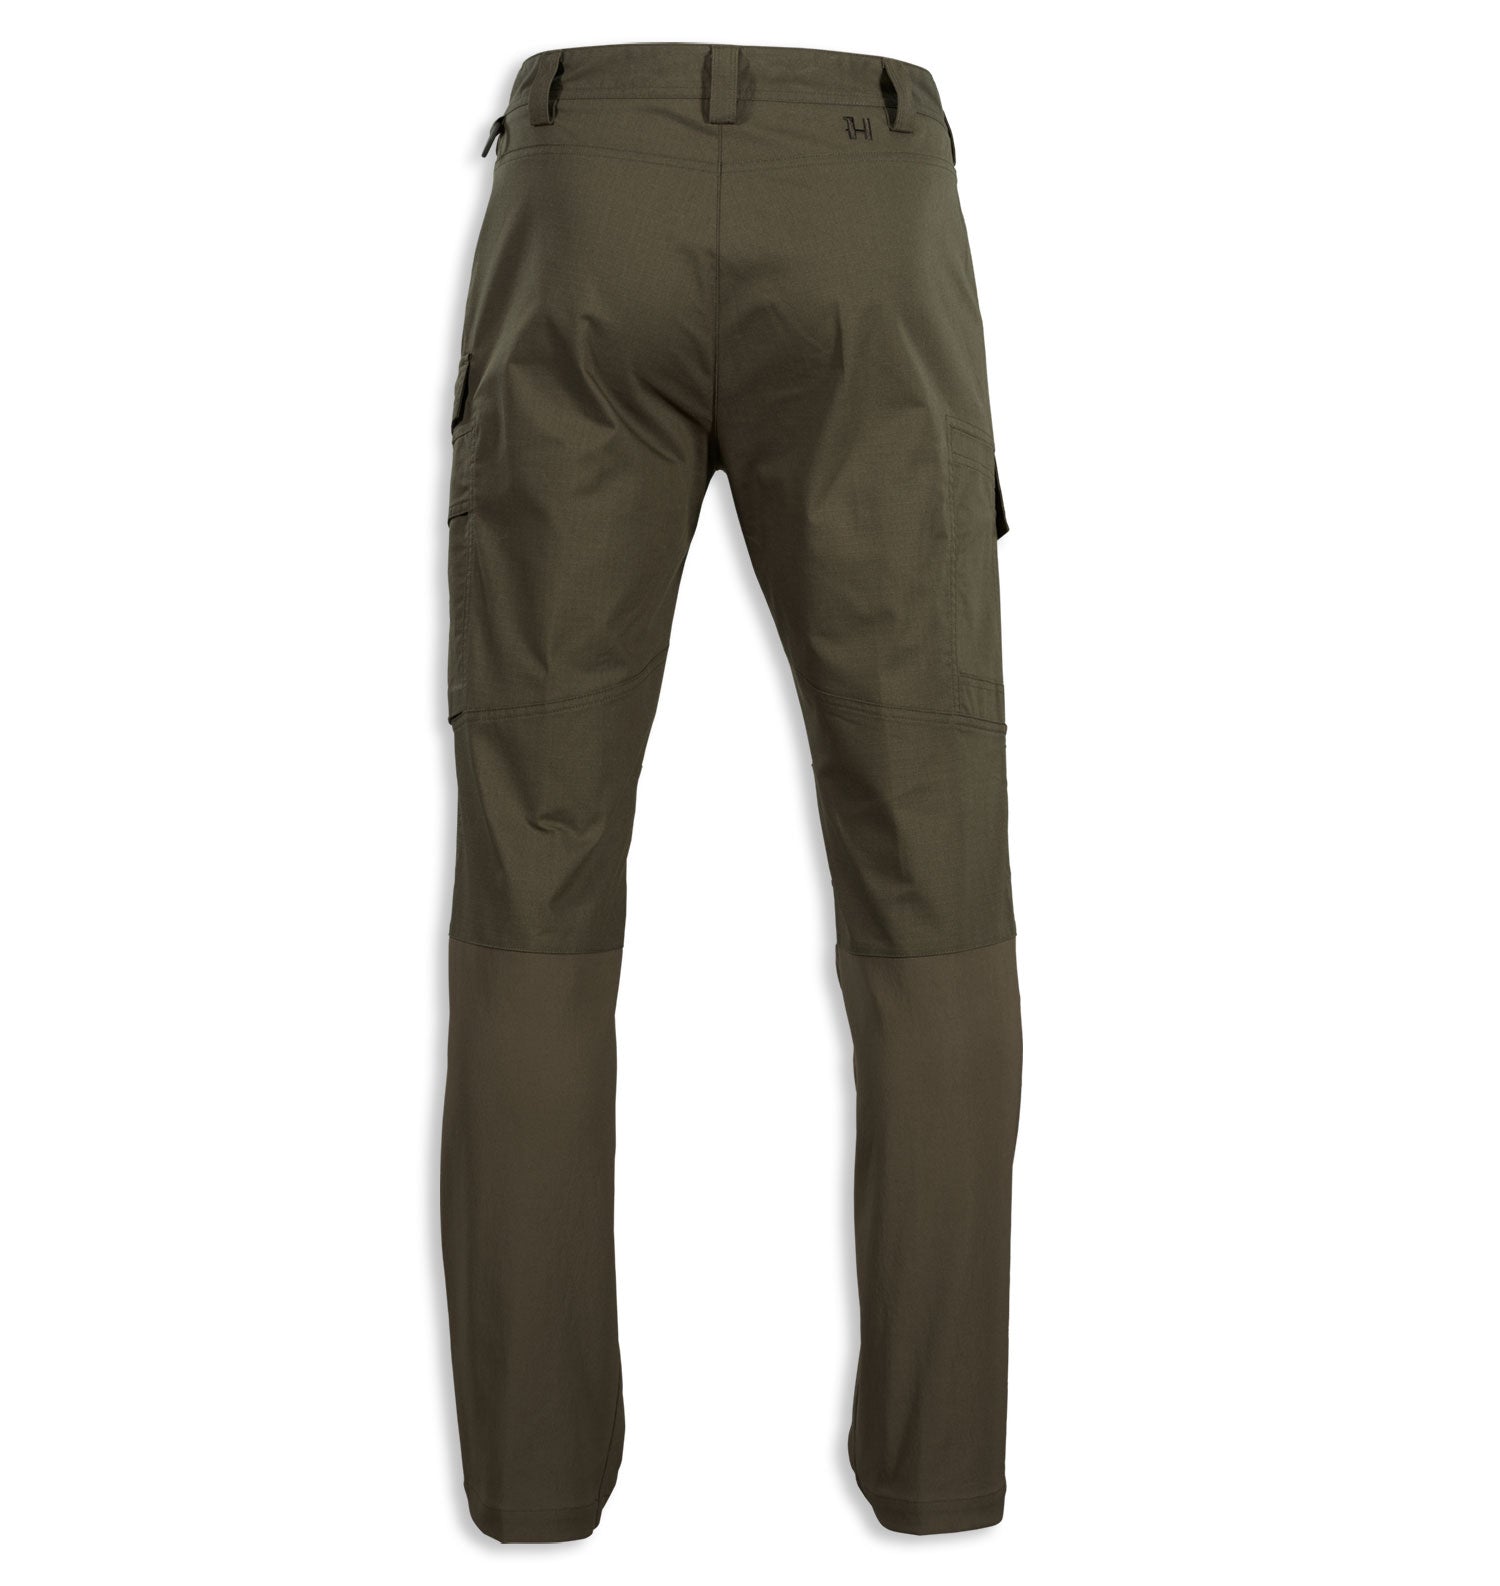 Men's Wildboar Pro Move Trousers Willow green | Buy Men's Wildboar Pro Move  Trousers Willow green here | Outnorth